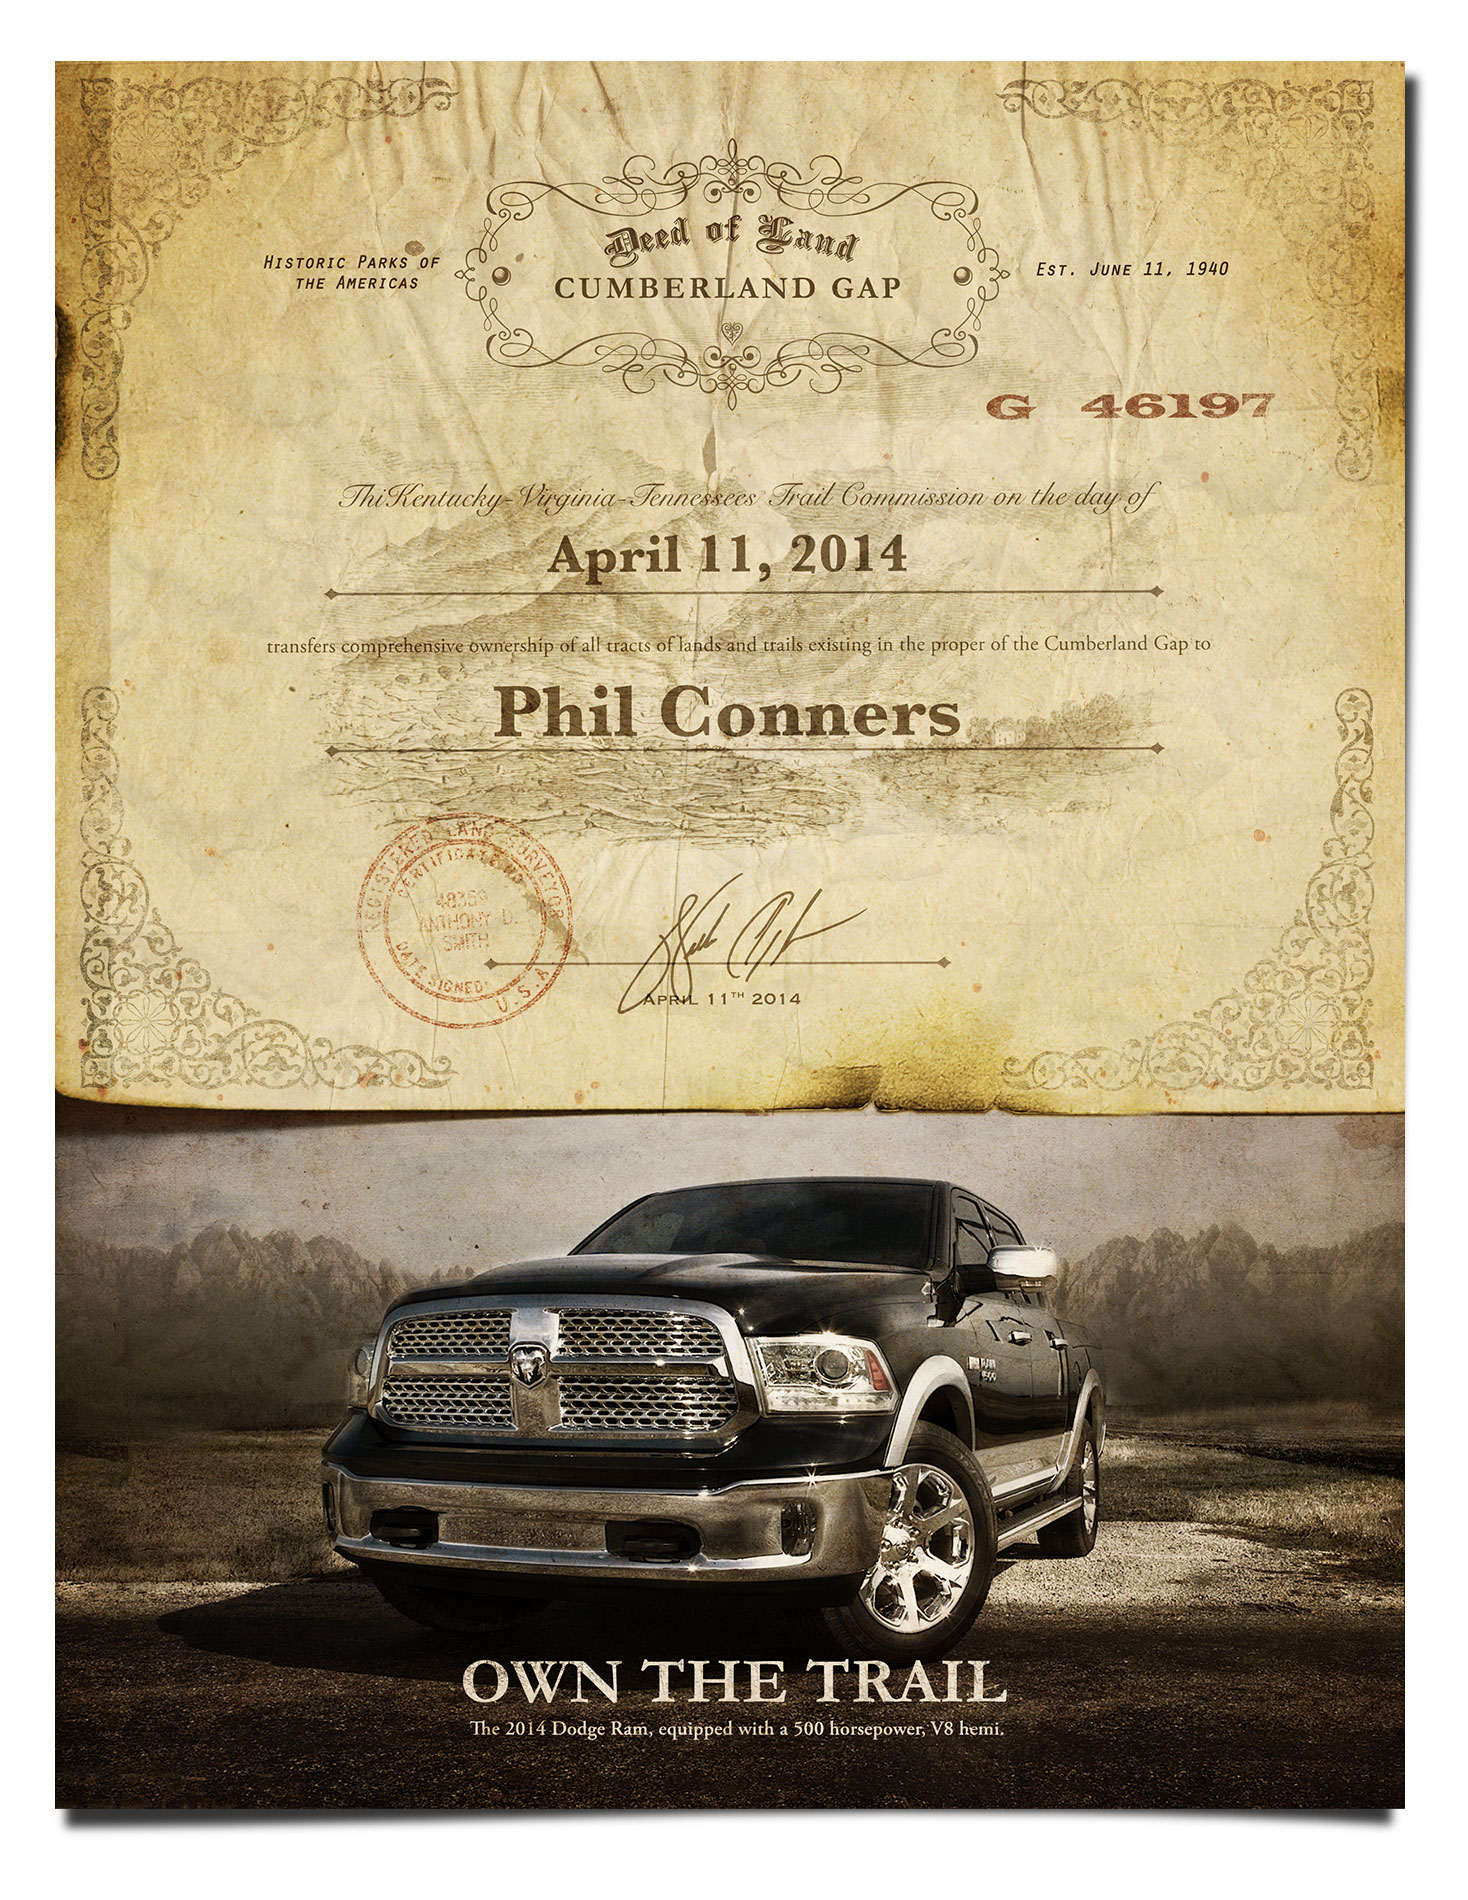 Dodge ad featuring deed of land to Phil conners over a photo of new dodge truck